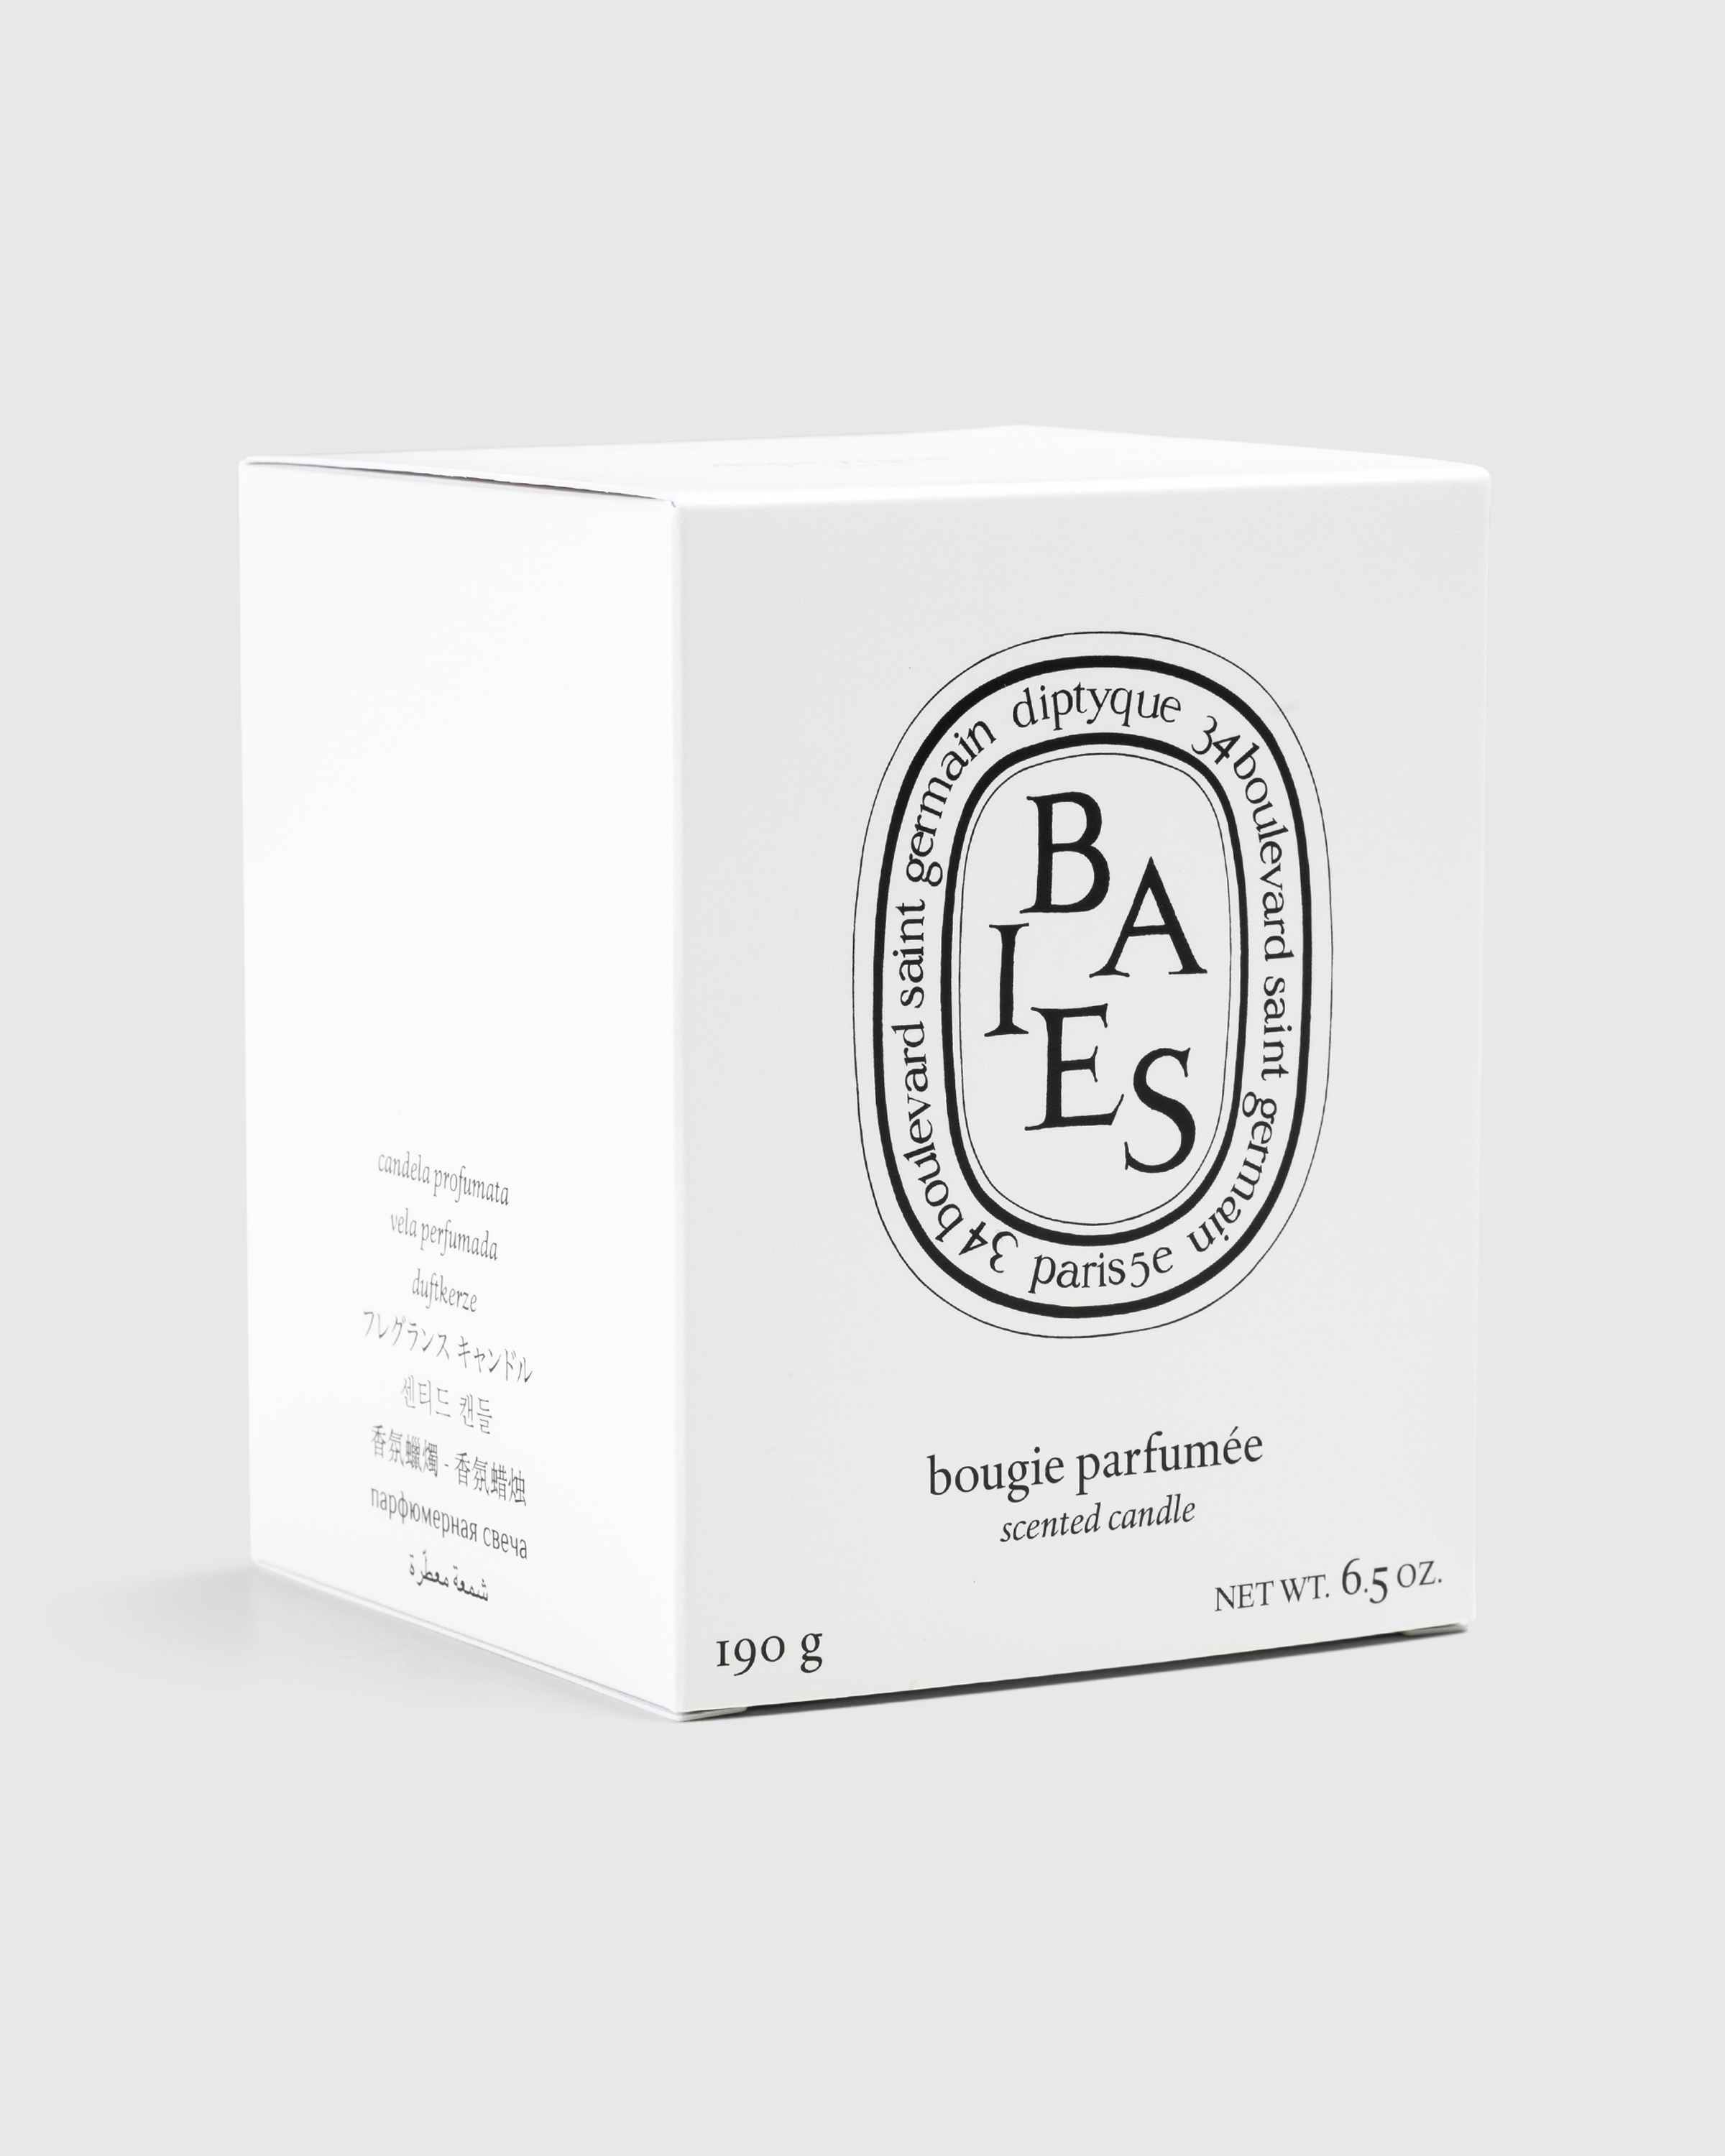 Diptyque – Standard Candle Baies 190g - Candles & Fragrances - White - Image 3